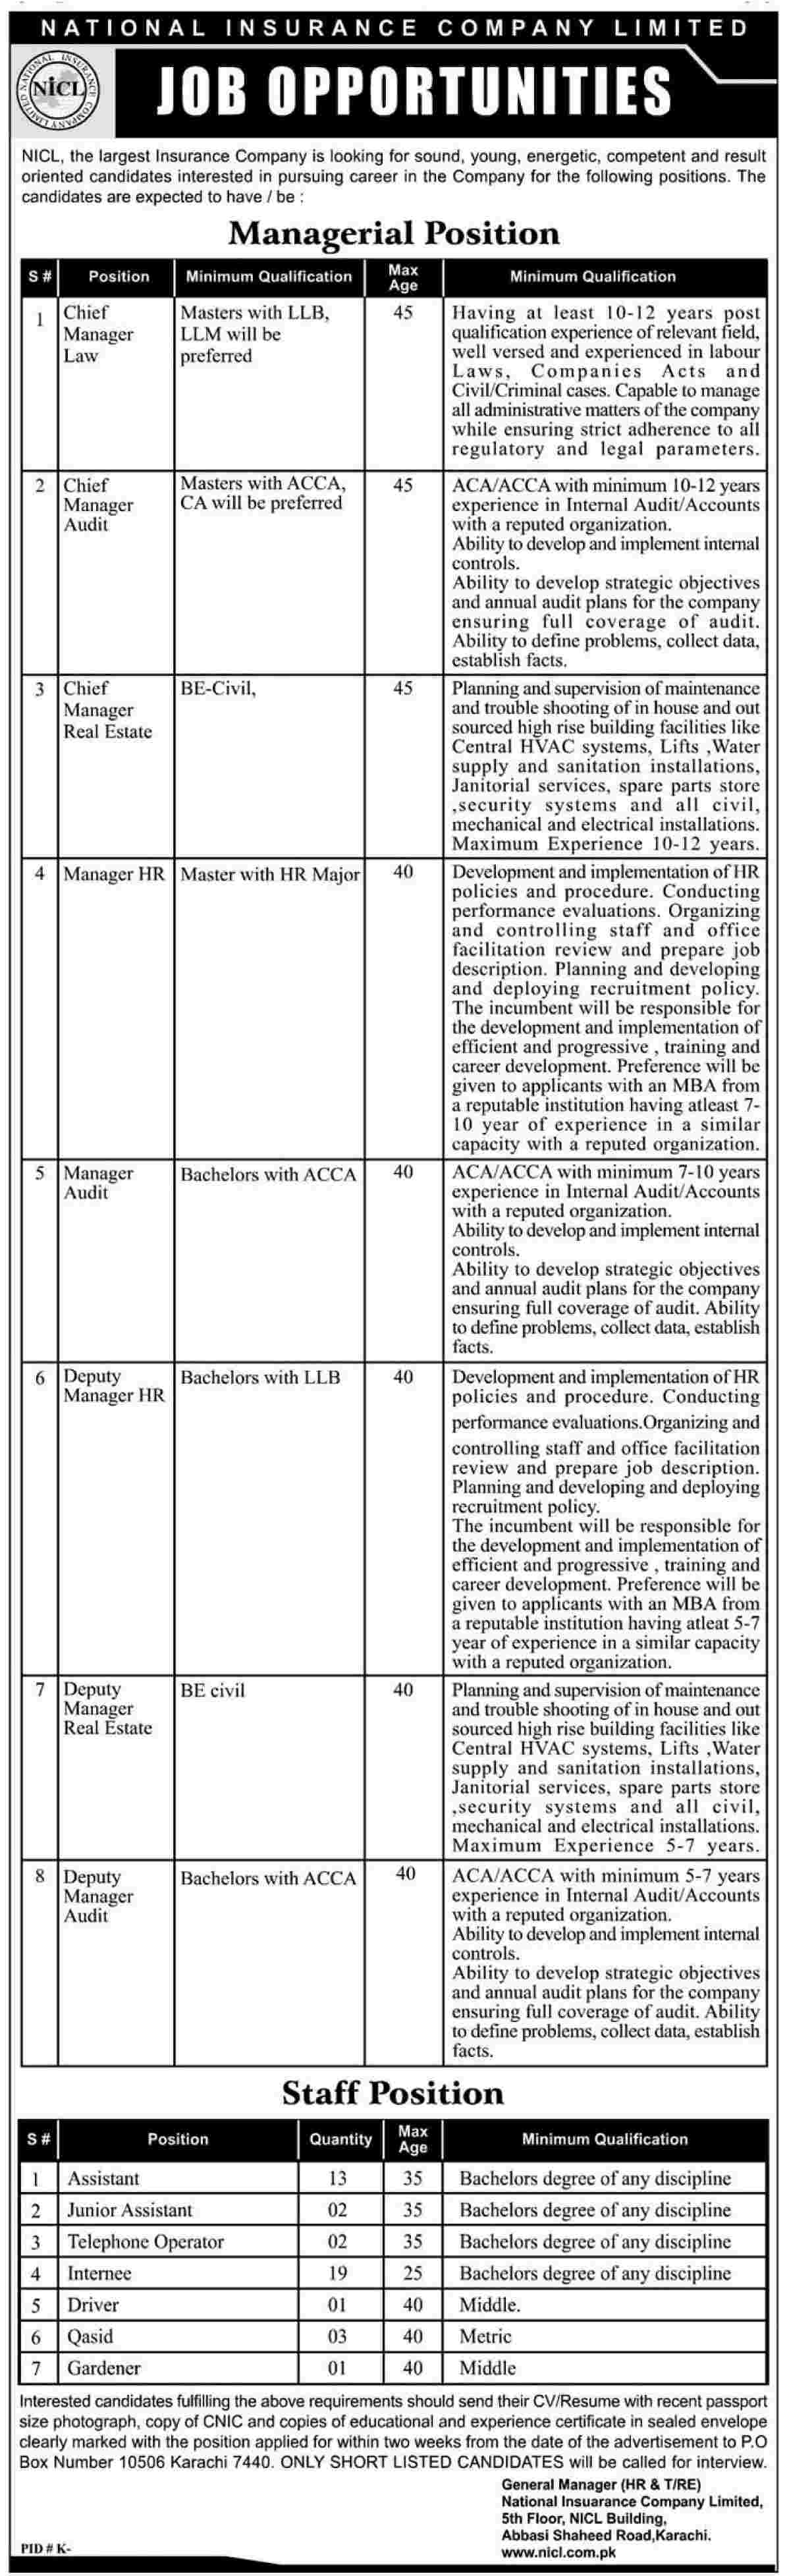 National Insurance Company Limited Jobs 2012 for Managers & Staff